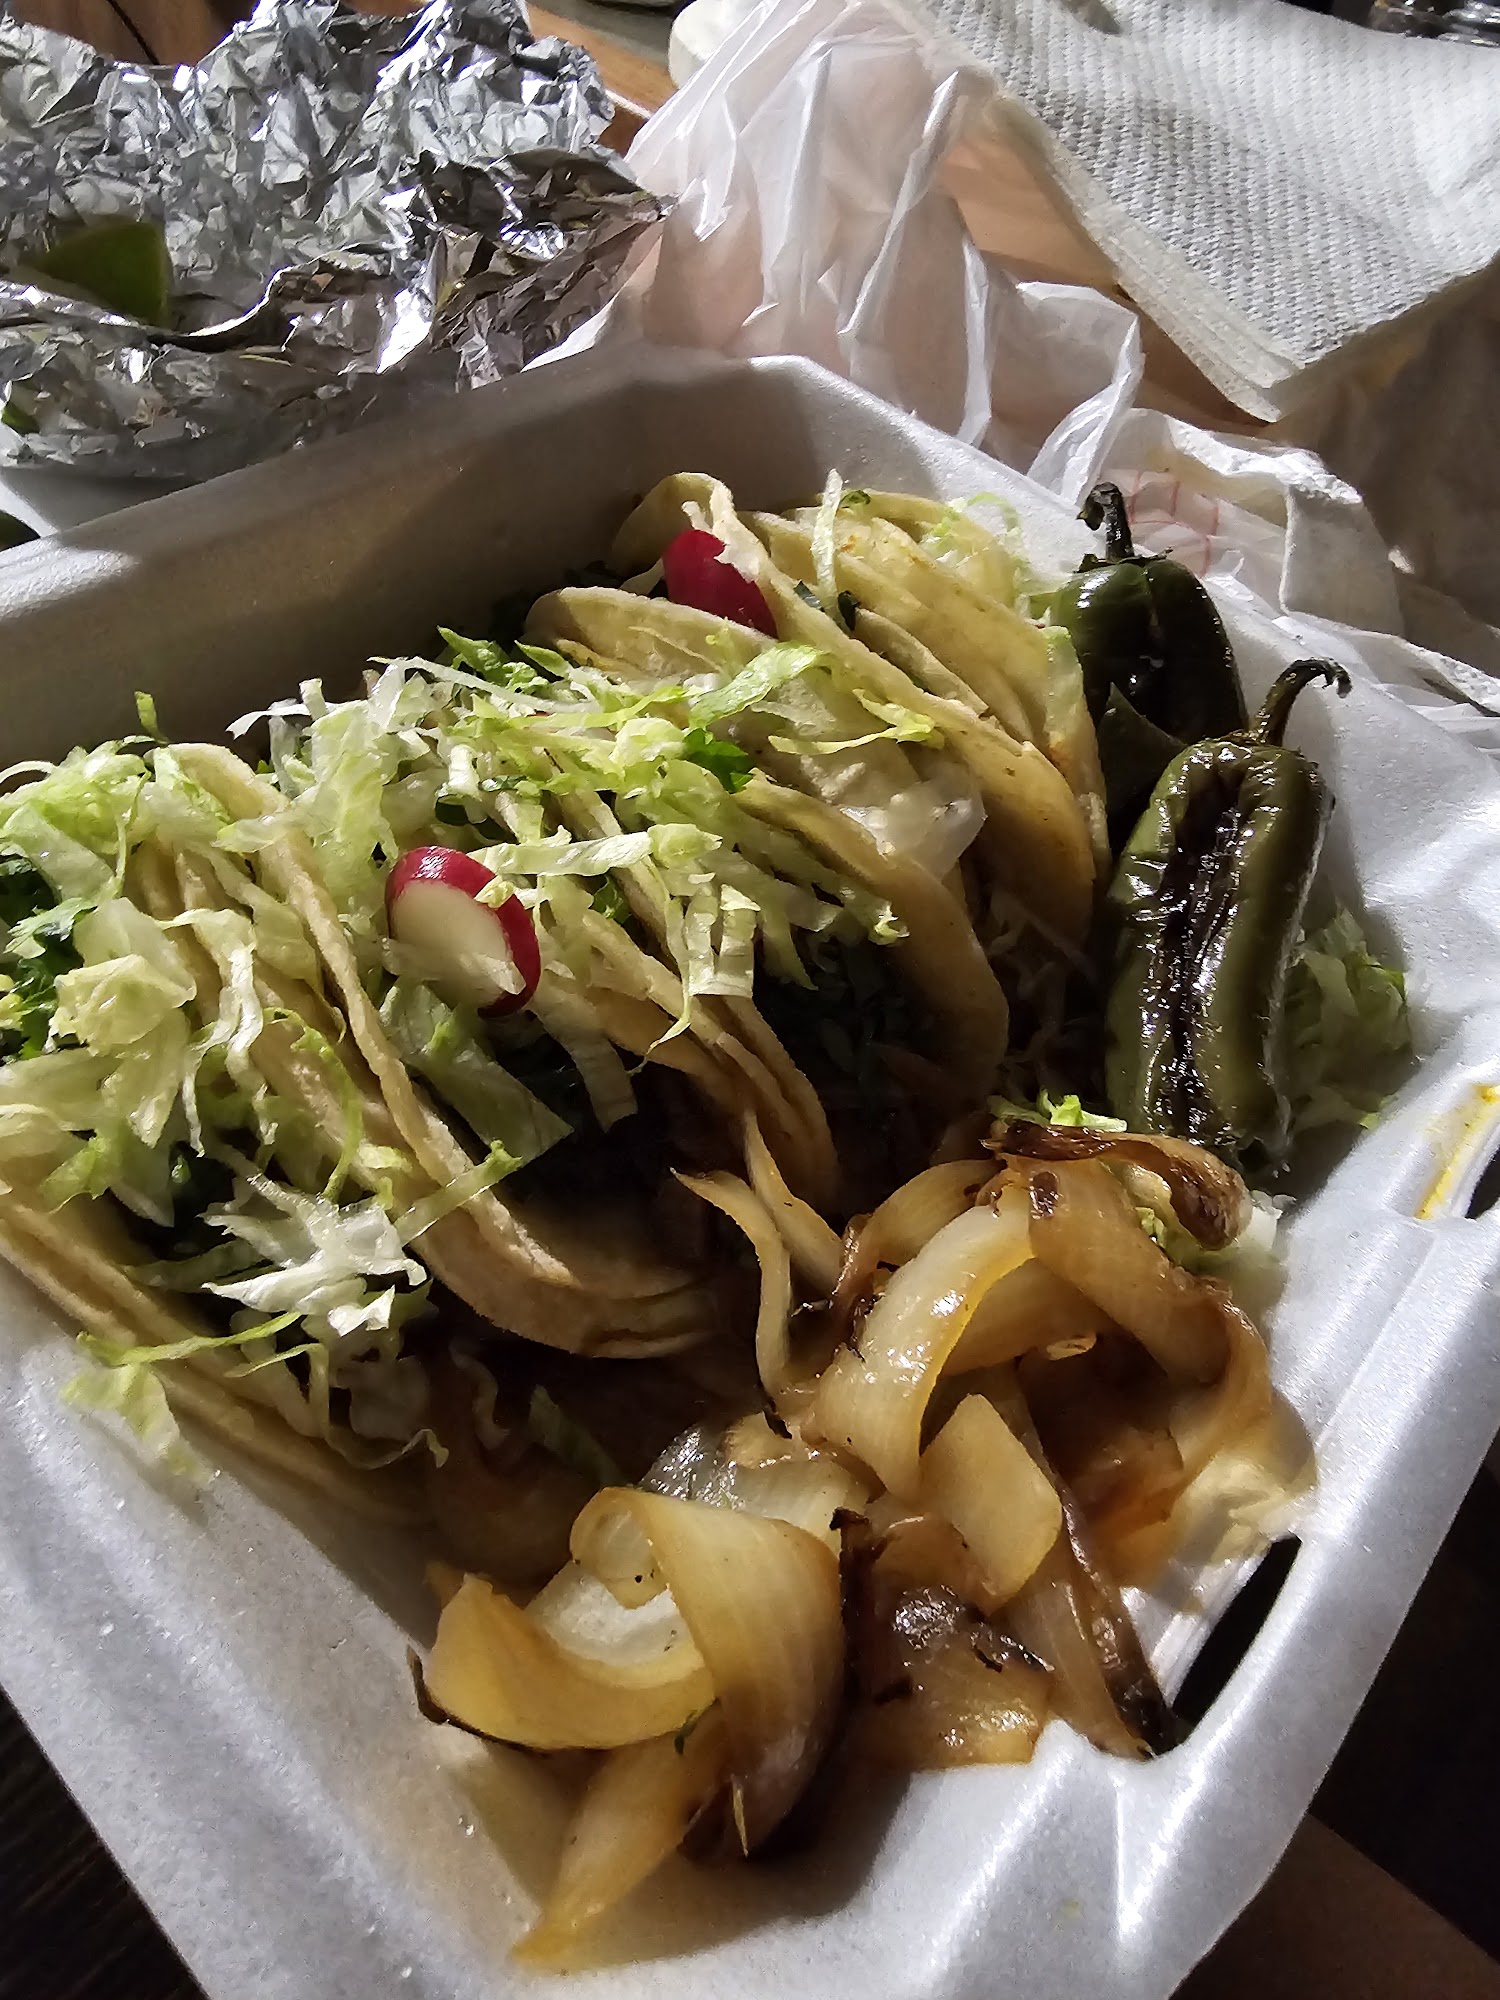 Tacos Don Lalo Food truck